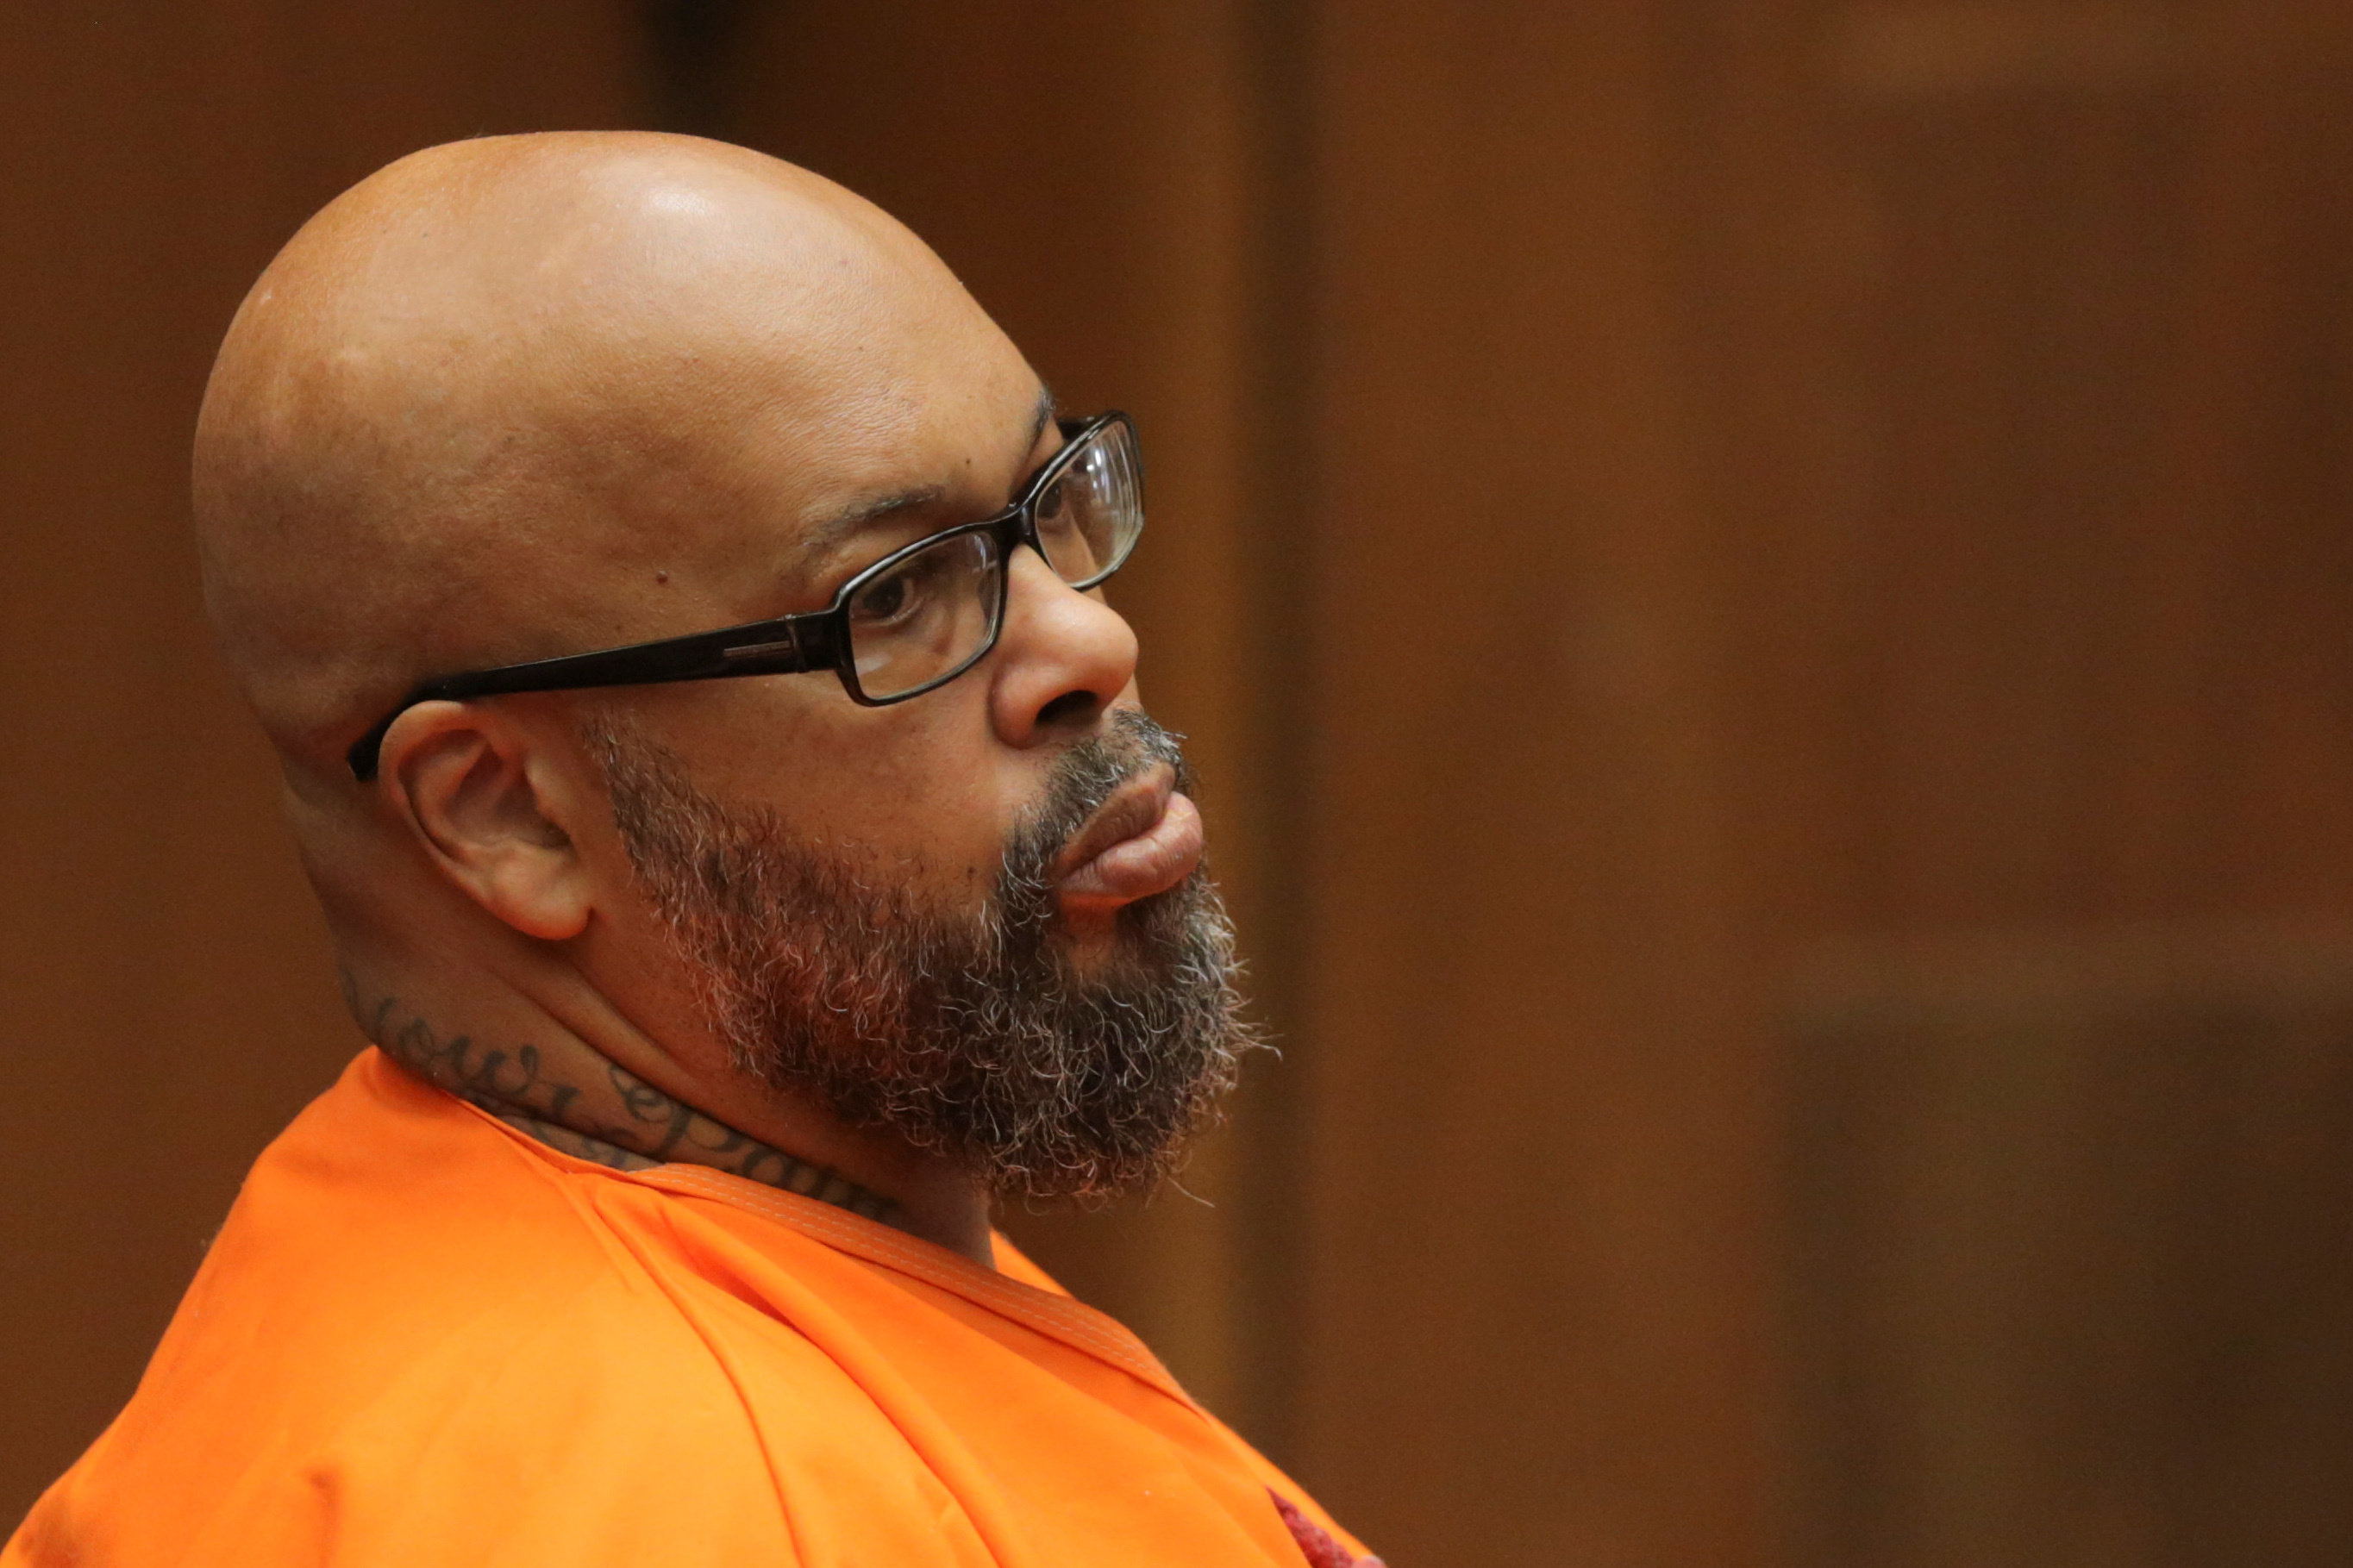 suge knight in surviving compton